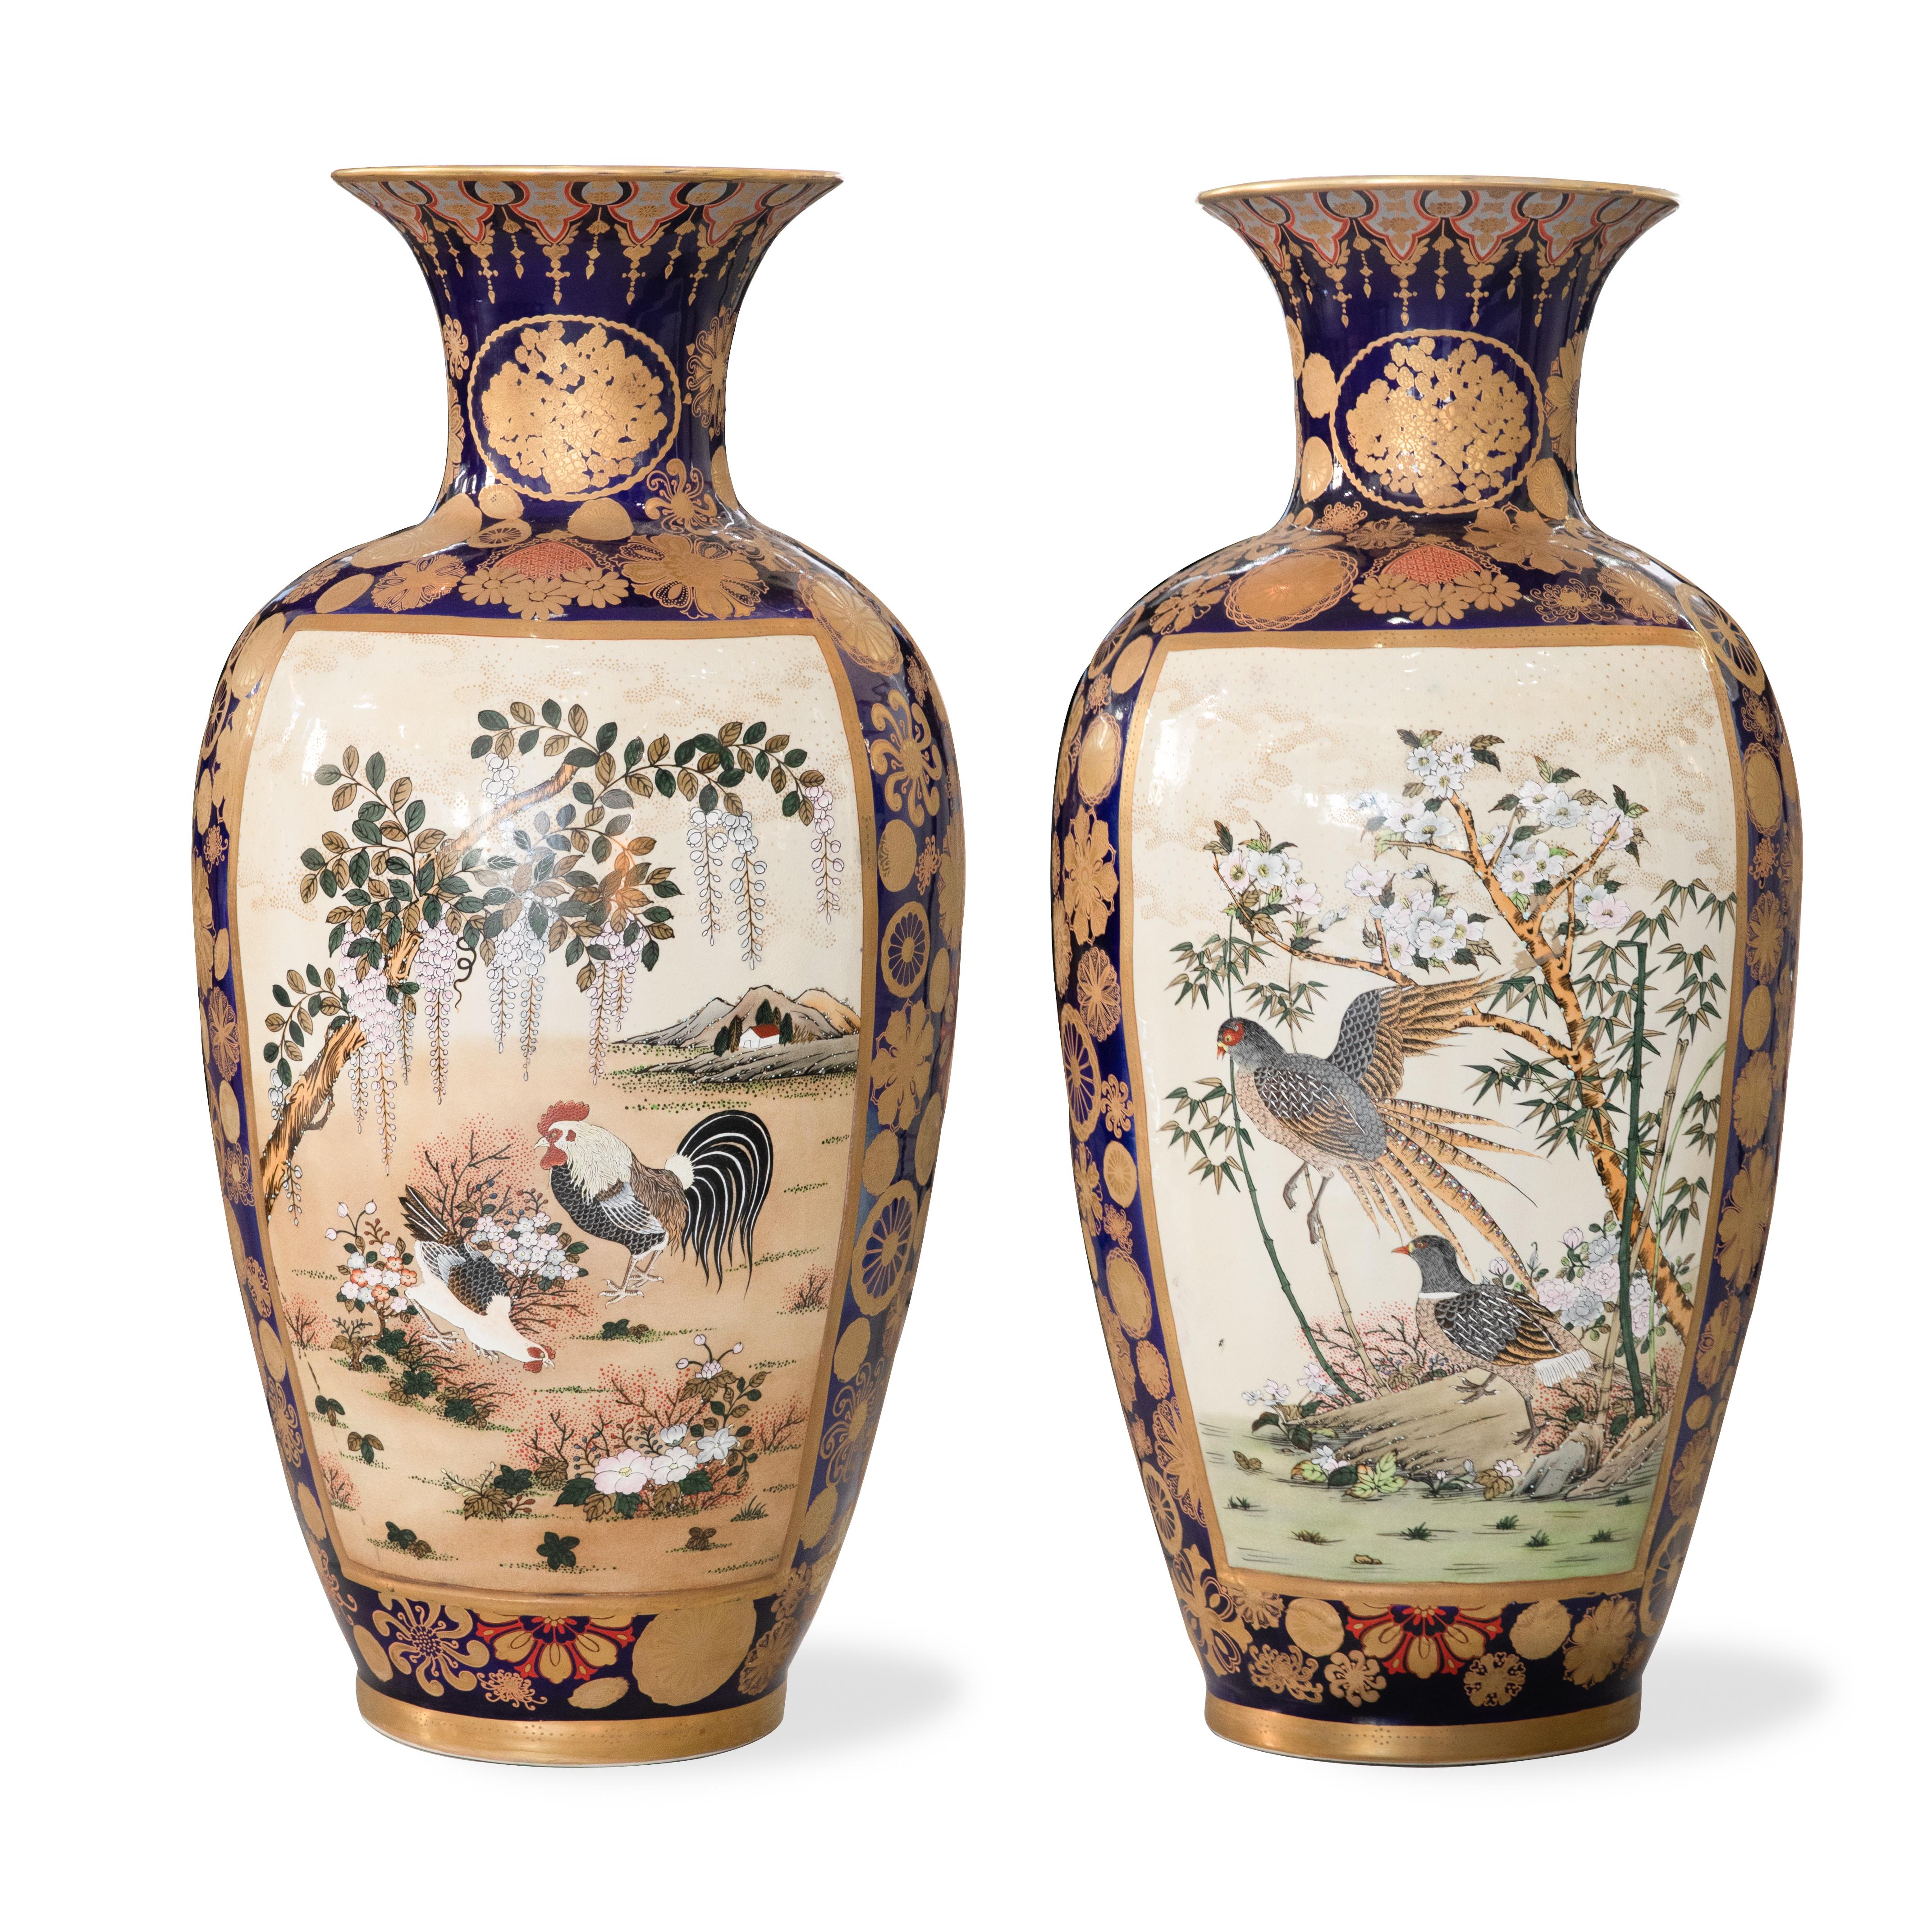 Offered is a pair of palace sized vintage Japanese Kutani/Satsuma vases with pre 1921 markings on base. The vases are in good condition with some glaze crackalure in keeping with their age. They measure 33.5